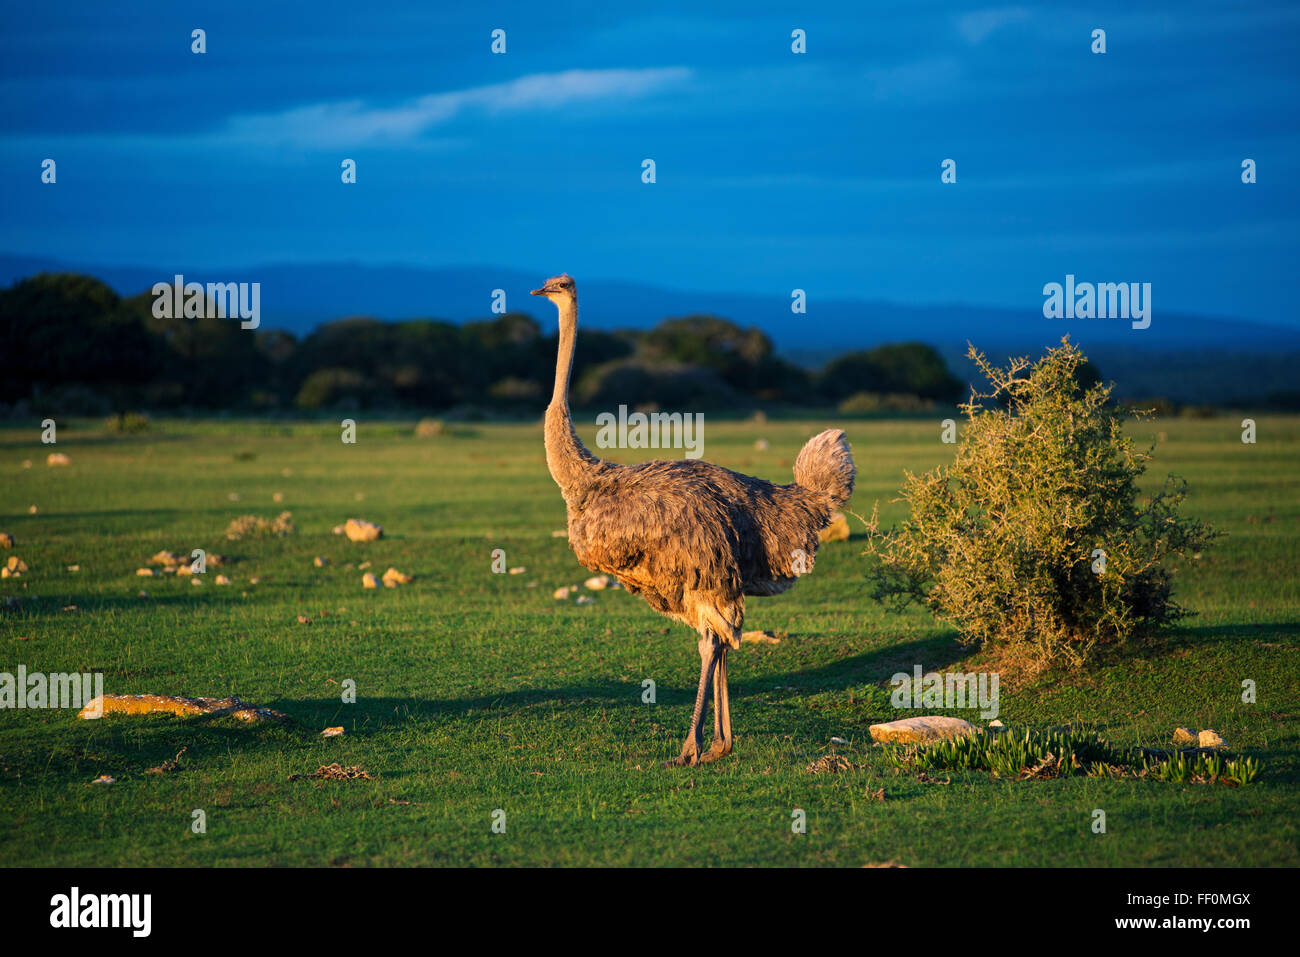 African ostrich (Struthio camelus), De Hoop Nature Reserve, UNESCO World Heritage Site, Garden Route, Western Cape, South Africa Stock Photo